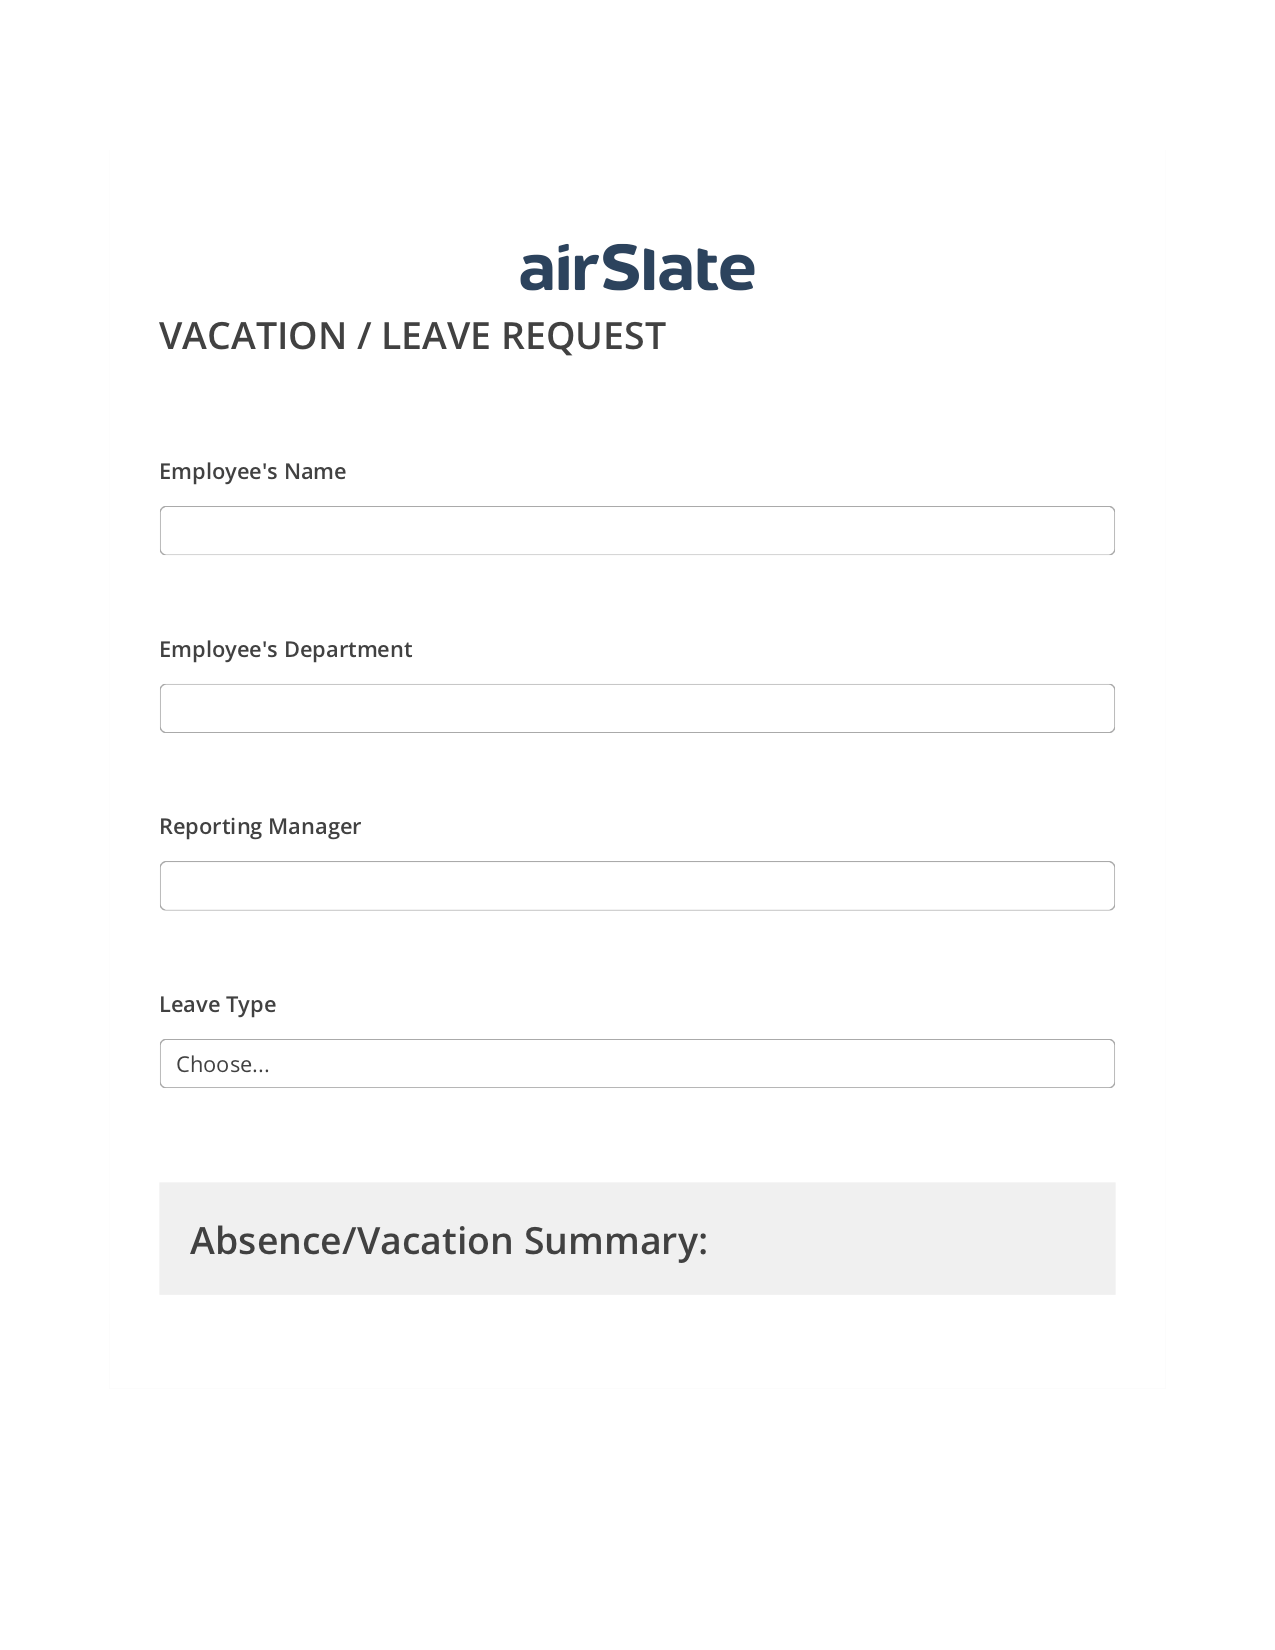 Vacation/Leave Request Workflow Pre-fill from CSV File Bot, Remove Slate Bot, Export to NetSuite Bot